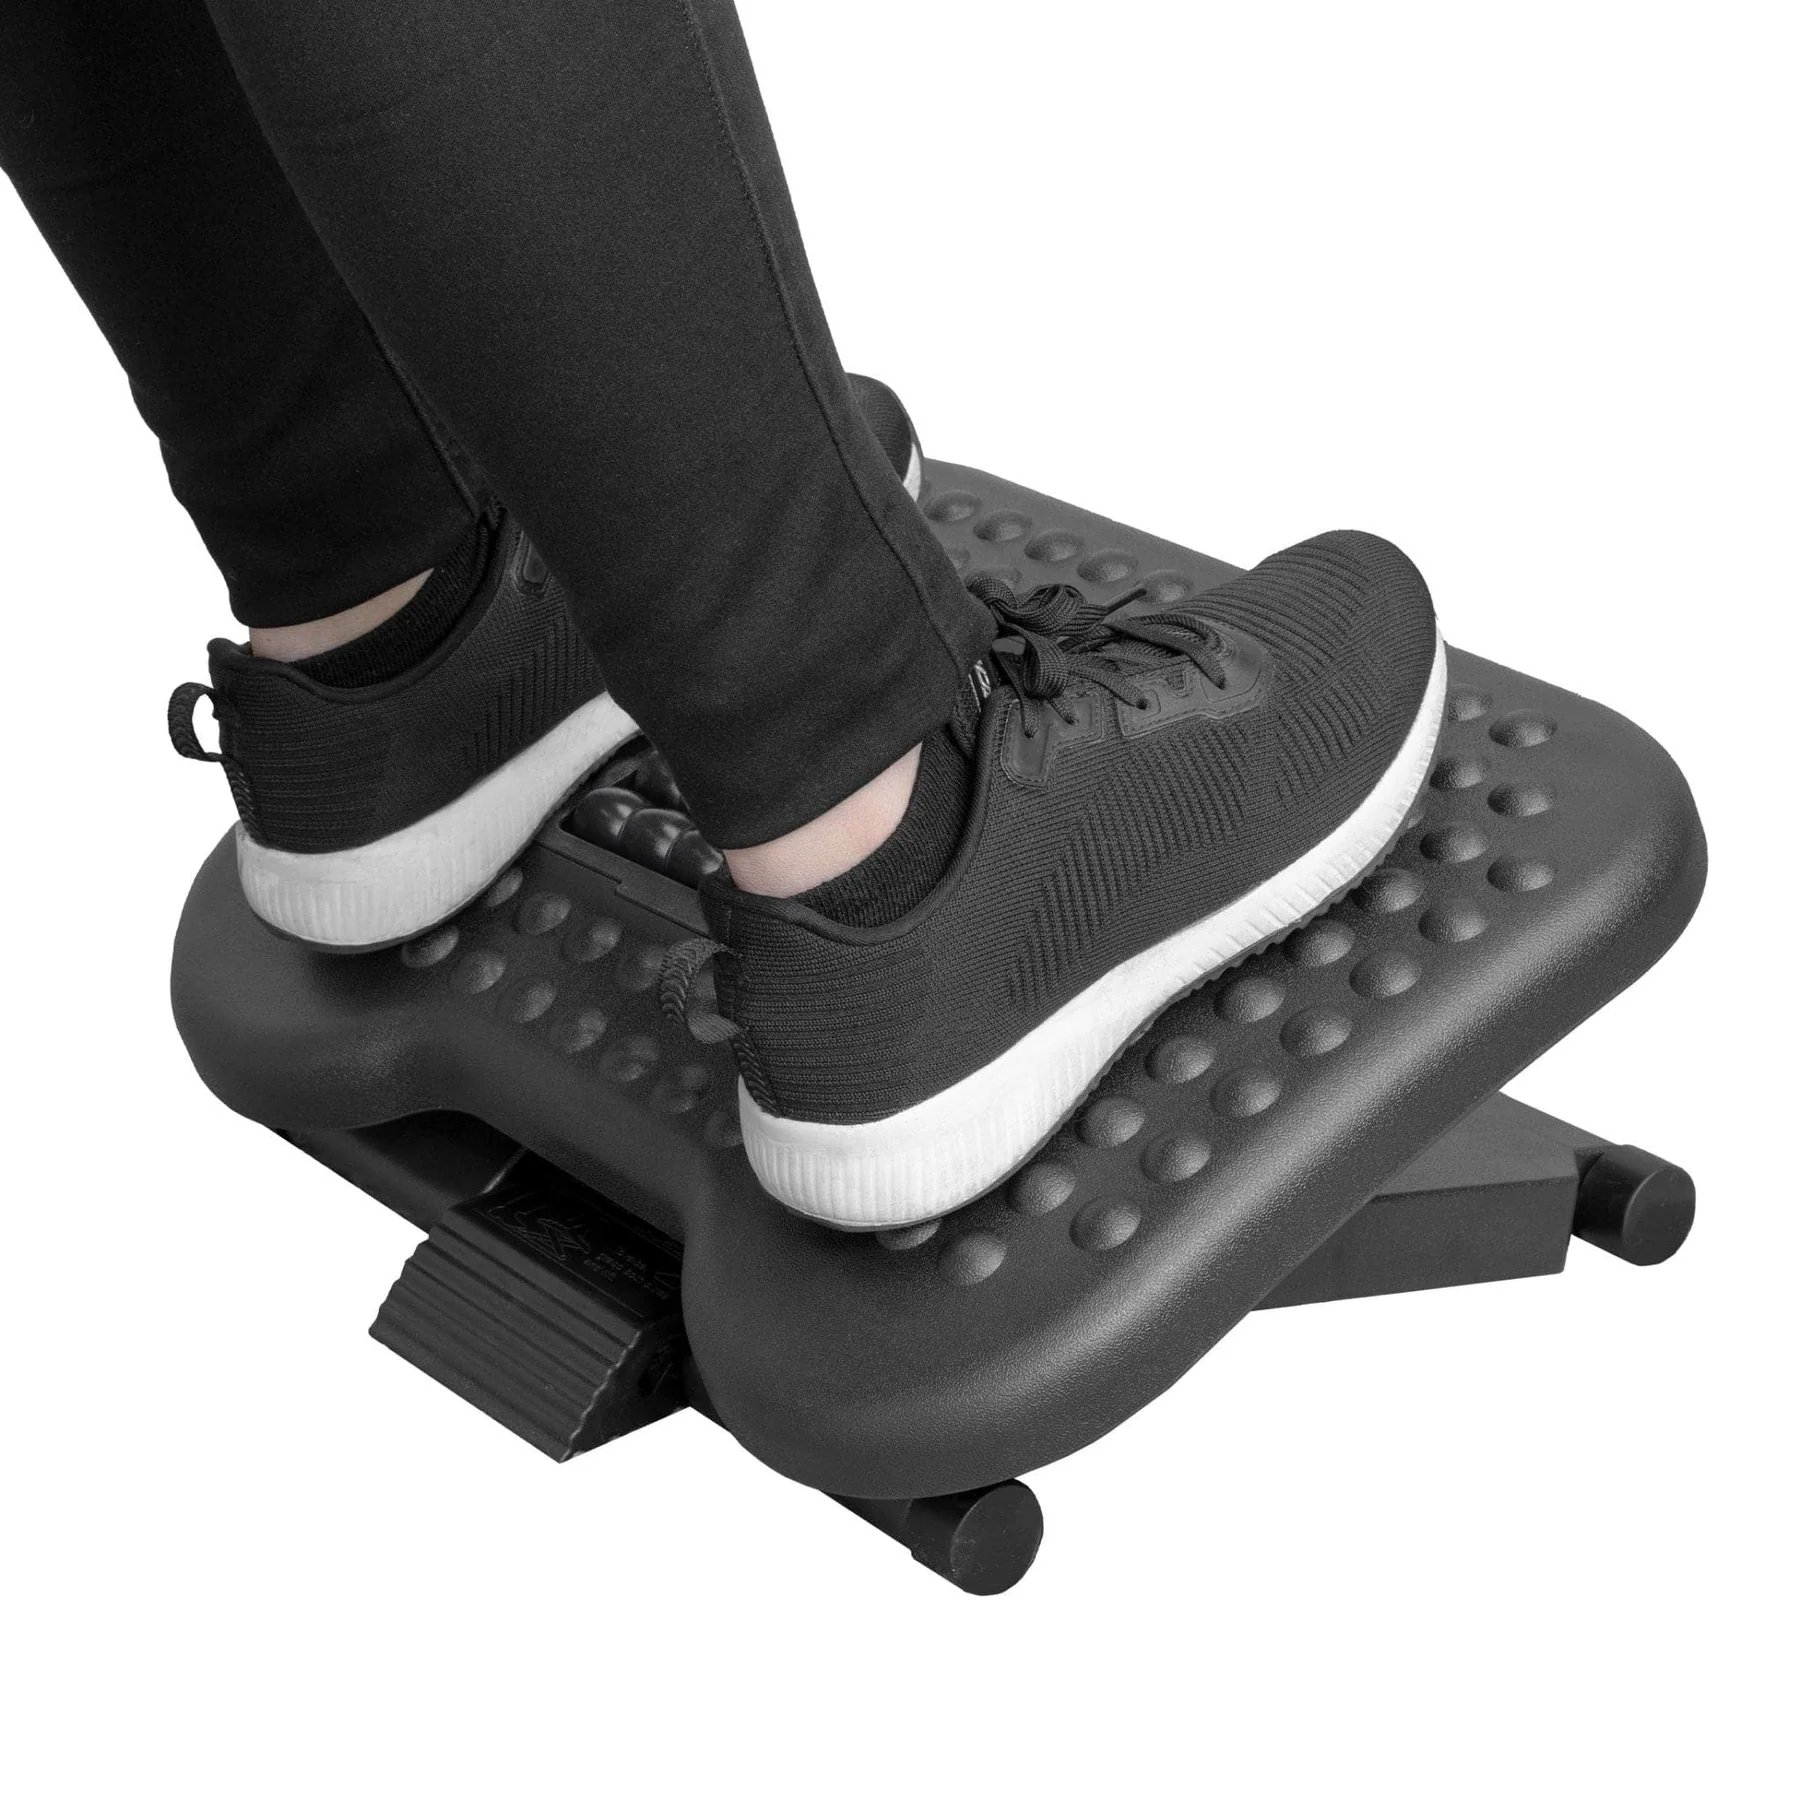 Mount IT! MI-7809 Height Adjustable and Rolling Massaging Footrest